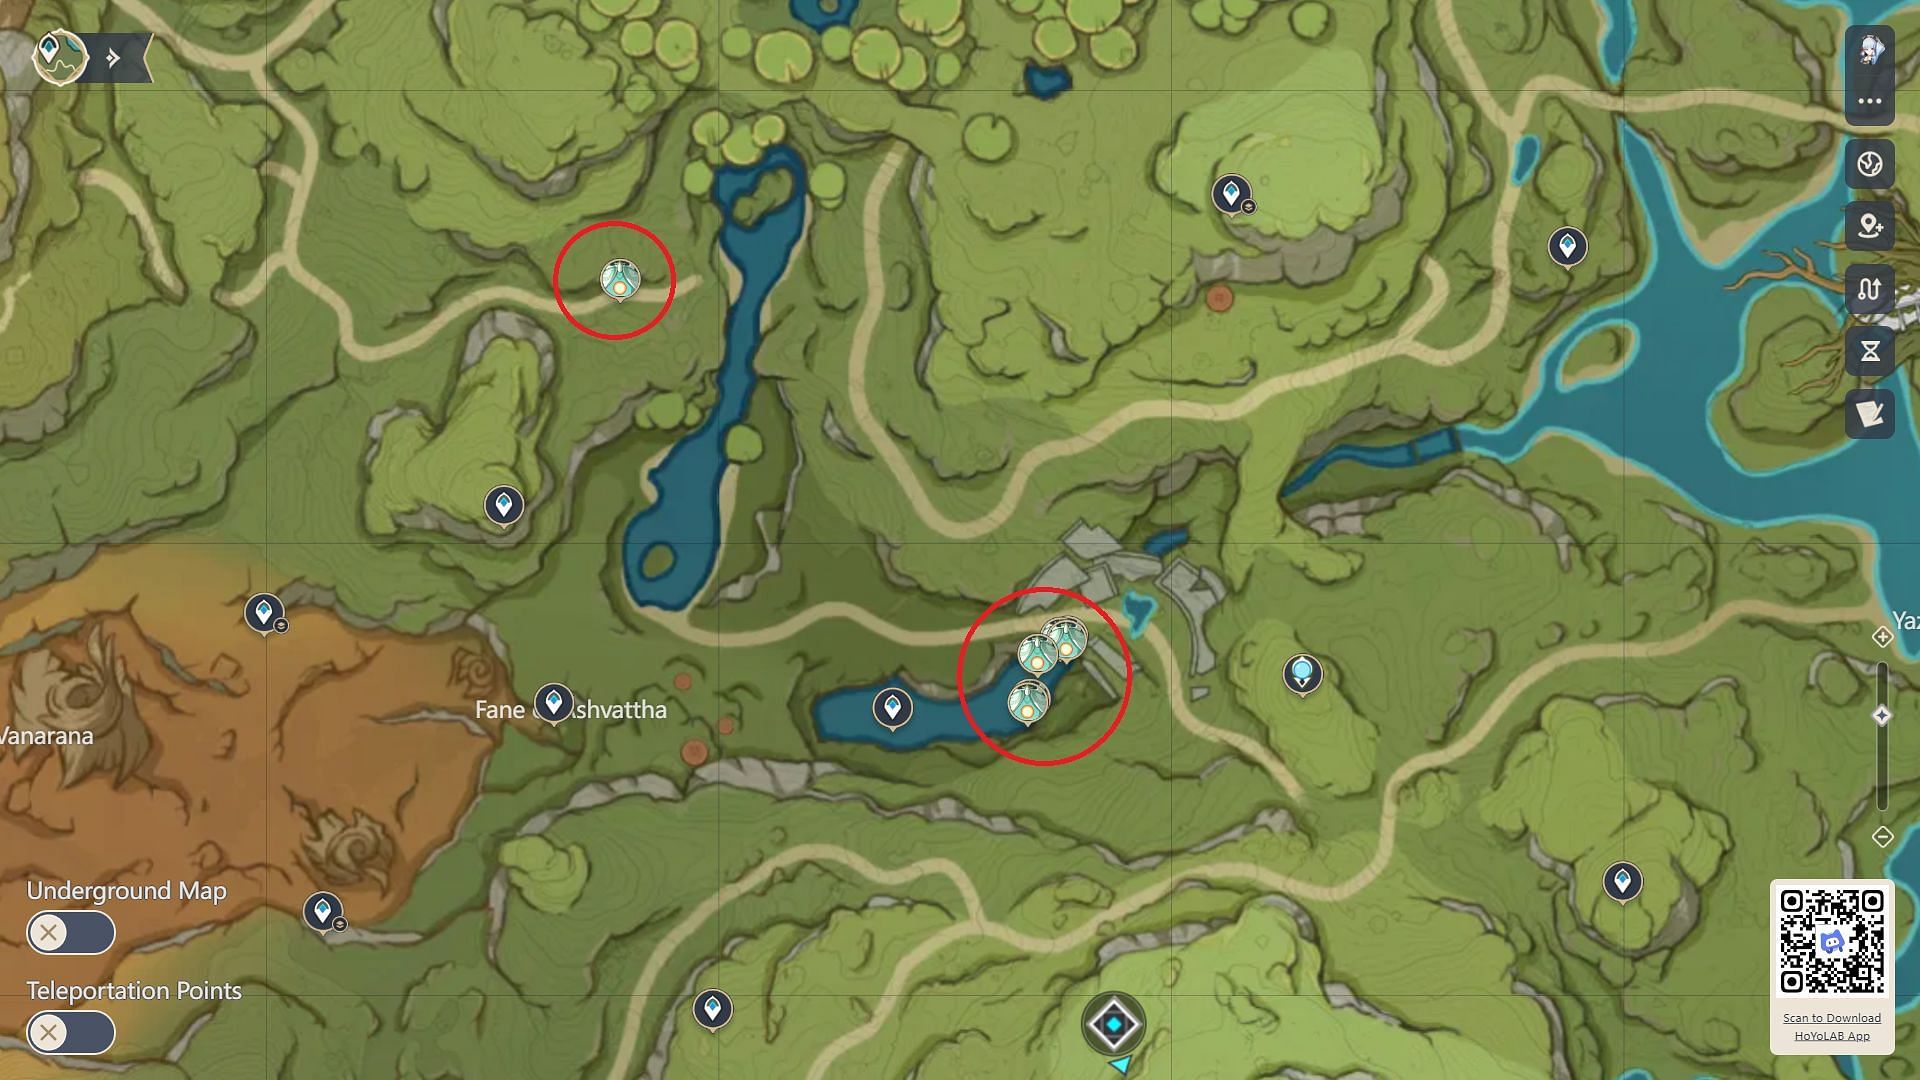 There are a few Specter spawns in the Sumeru forest area (Image via HoYoverse)